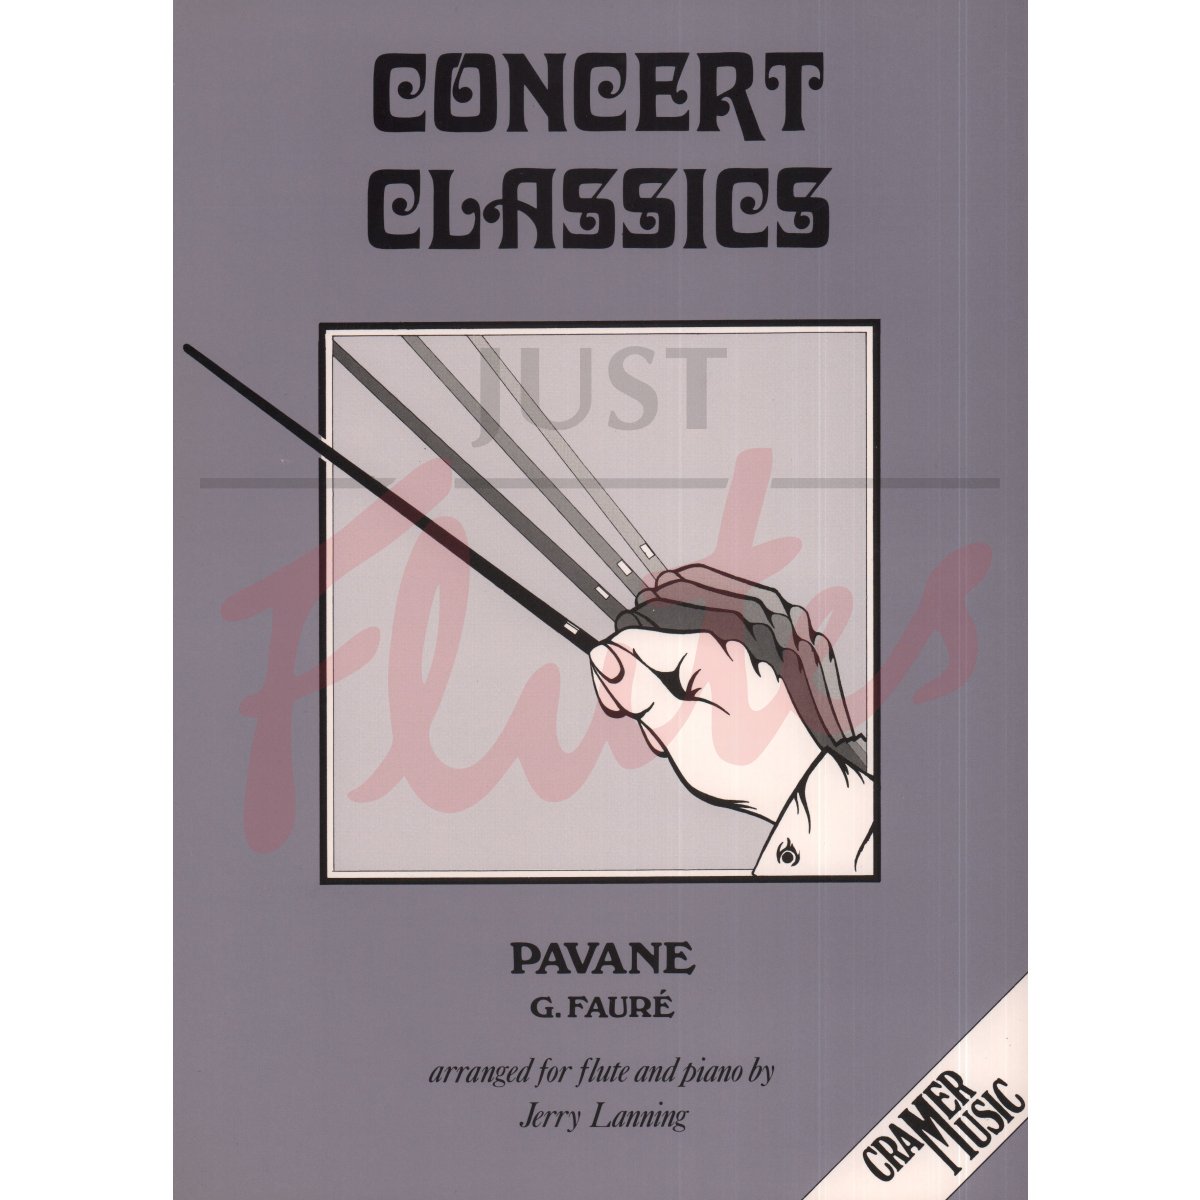 Pavane for Flute and Piano